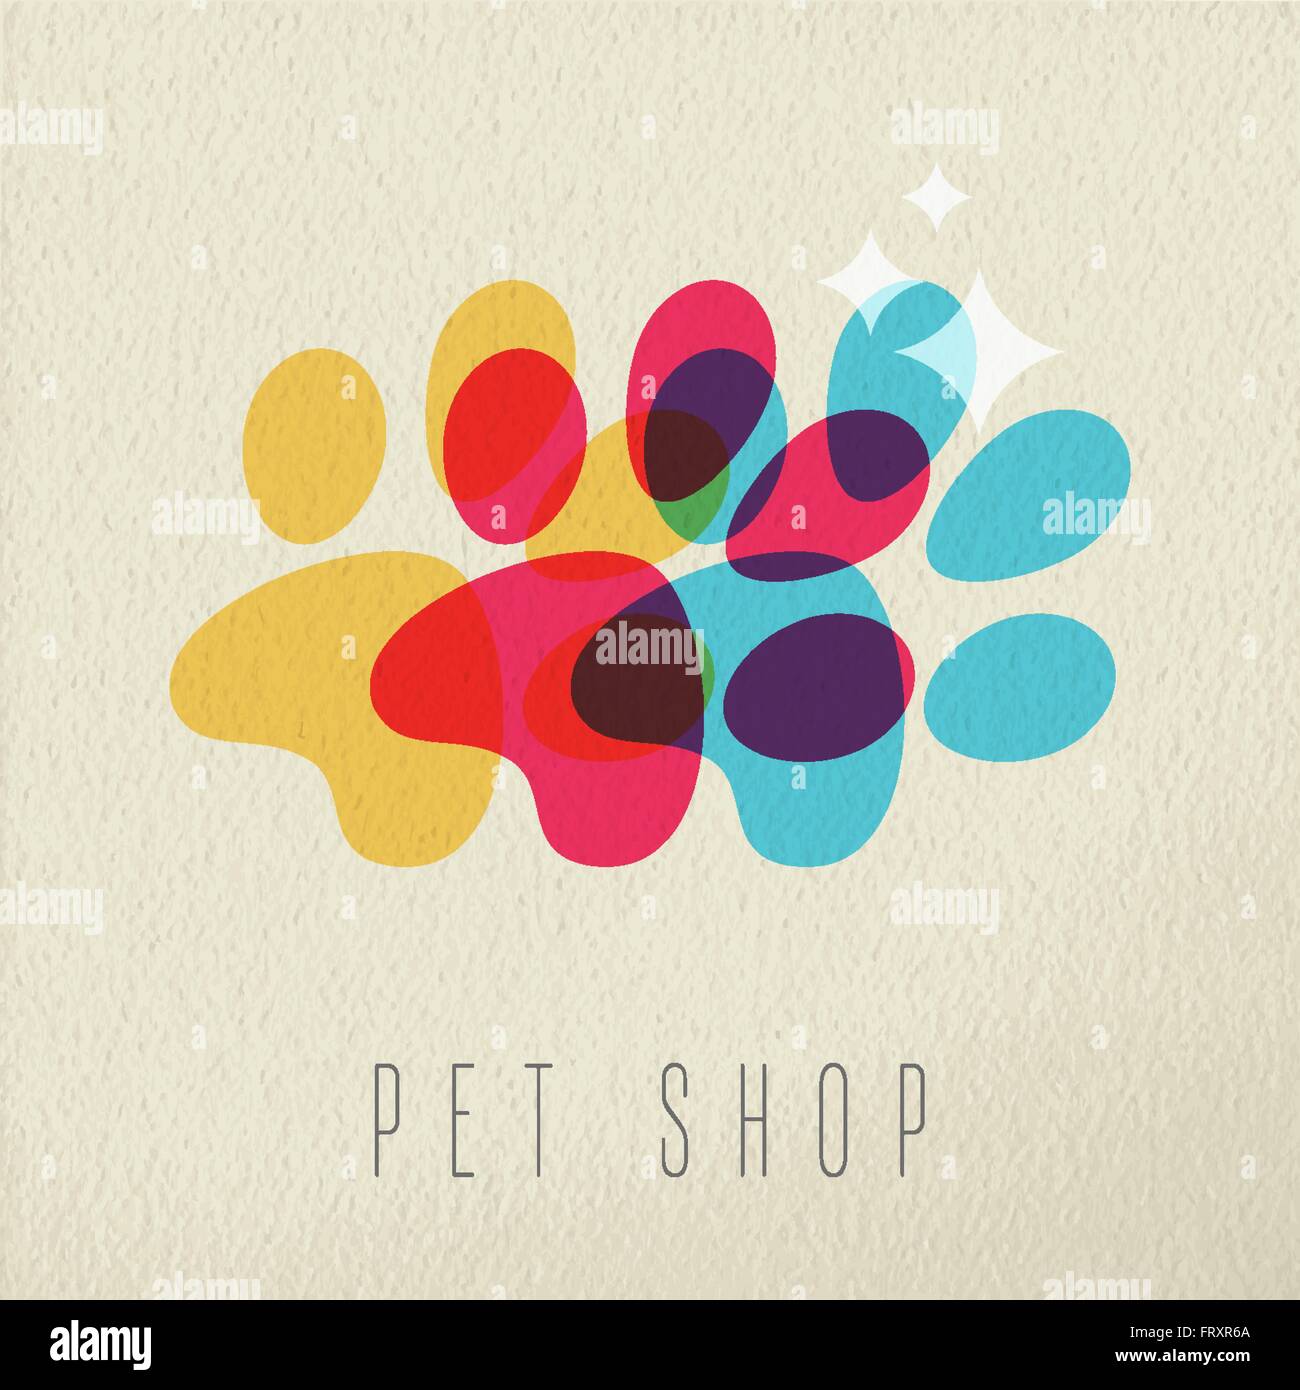 Pet shop concept, dog paw illustration with colorful silhouette on texture background. EPS10 vector. Stock Vector